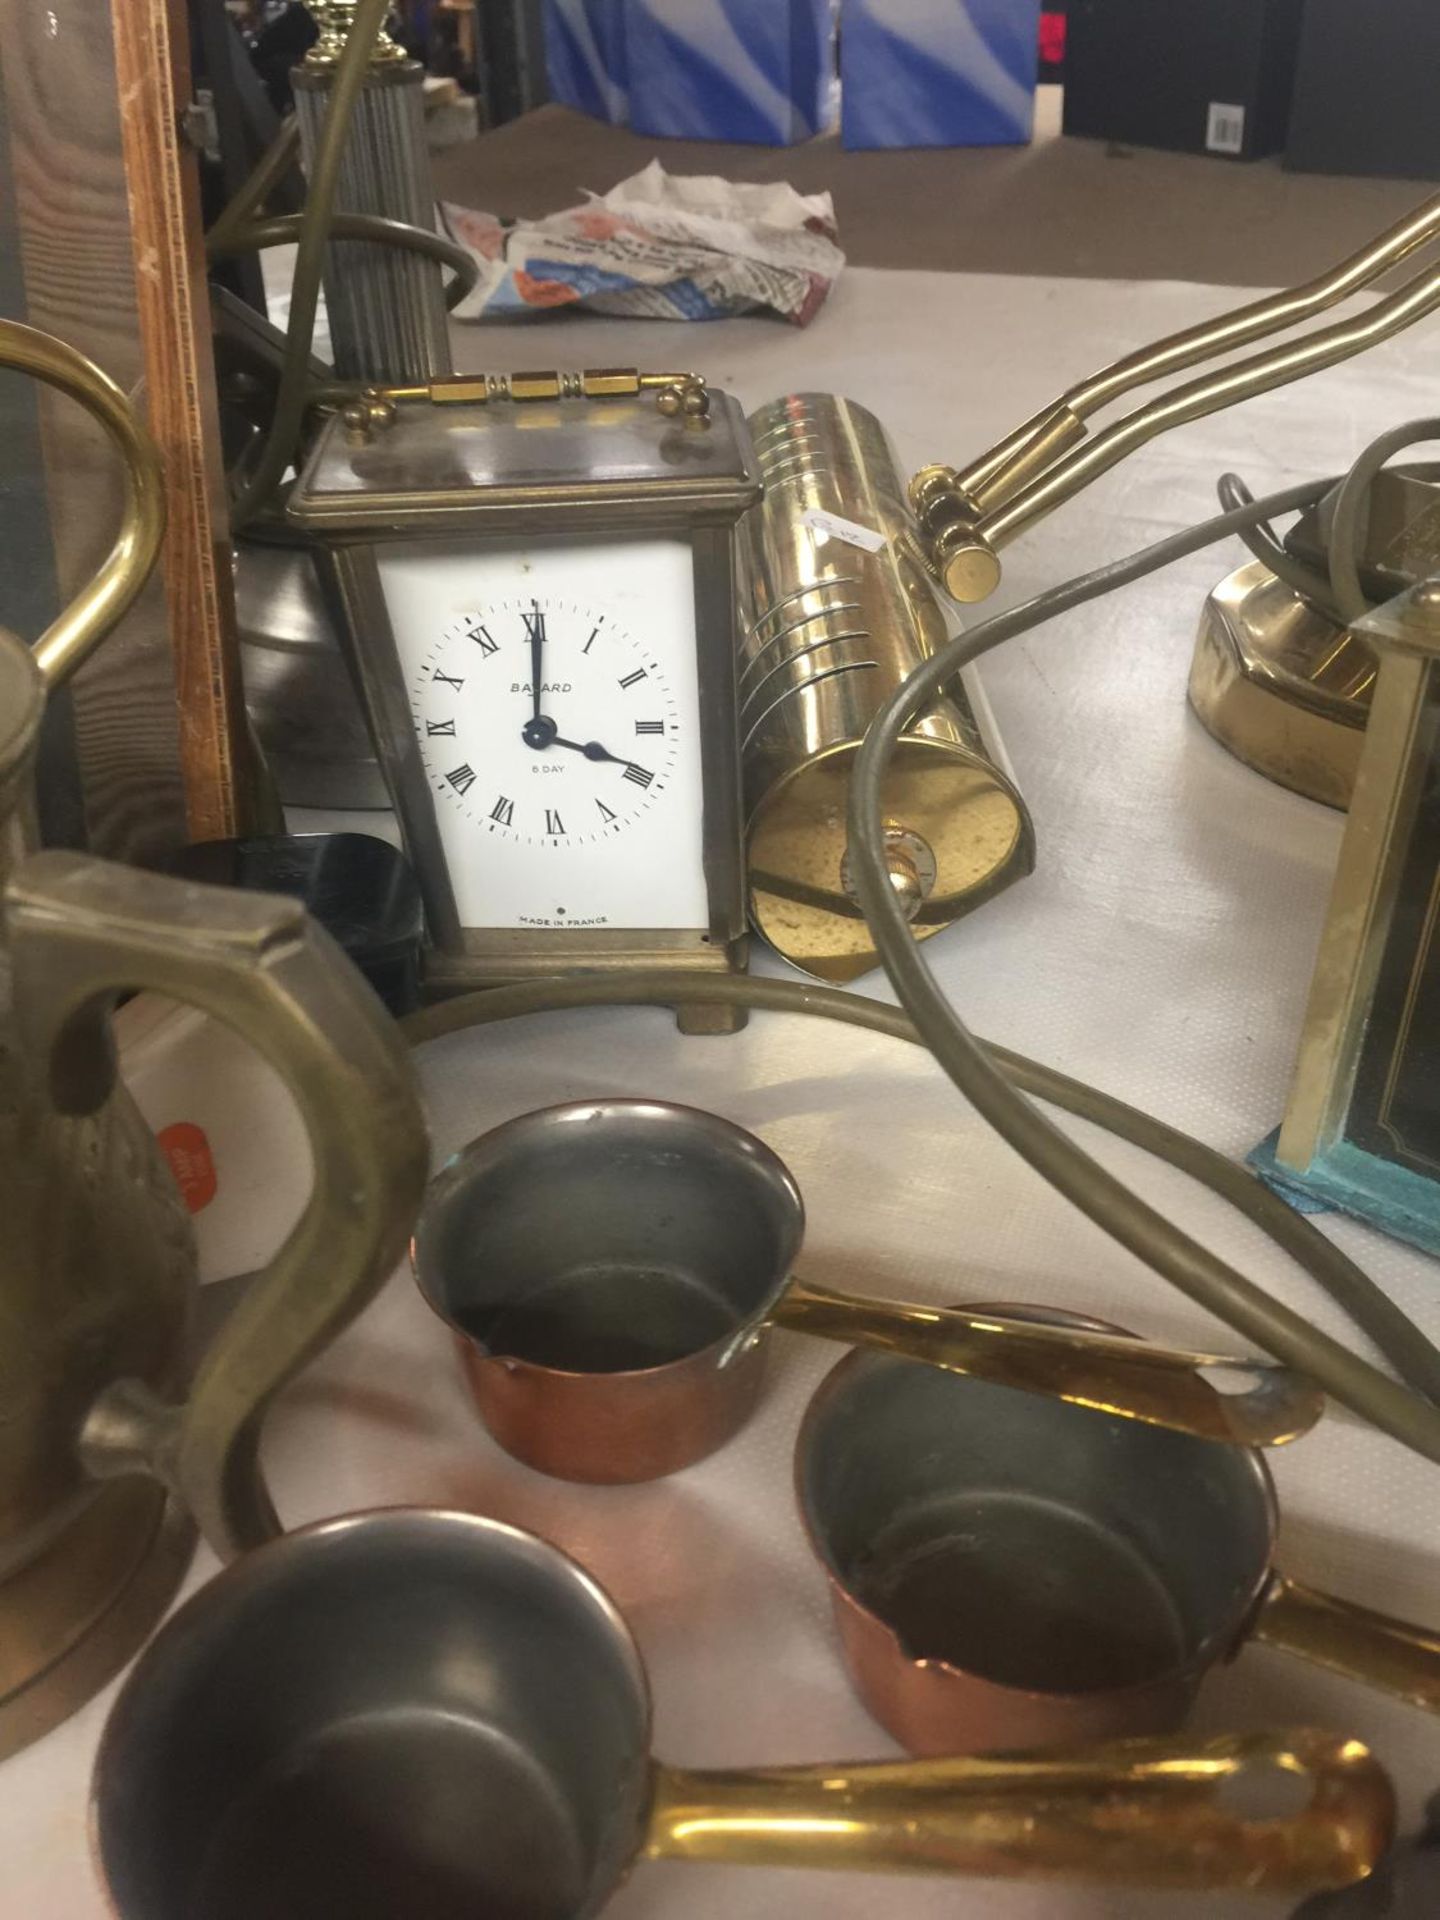 TWO BANKERS STYLE LAMPS, TWO CARRIAGE CLOCKS, COPPER JUG AND SMALL PANS, BRASS TANKARD, ETC - Image 4 of 6